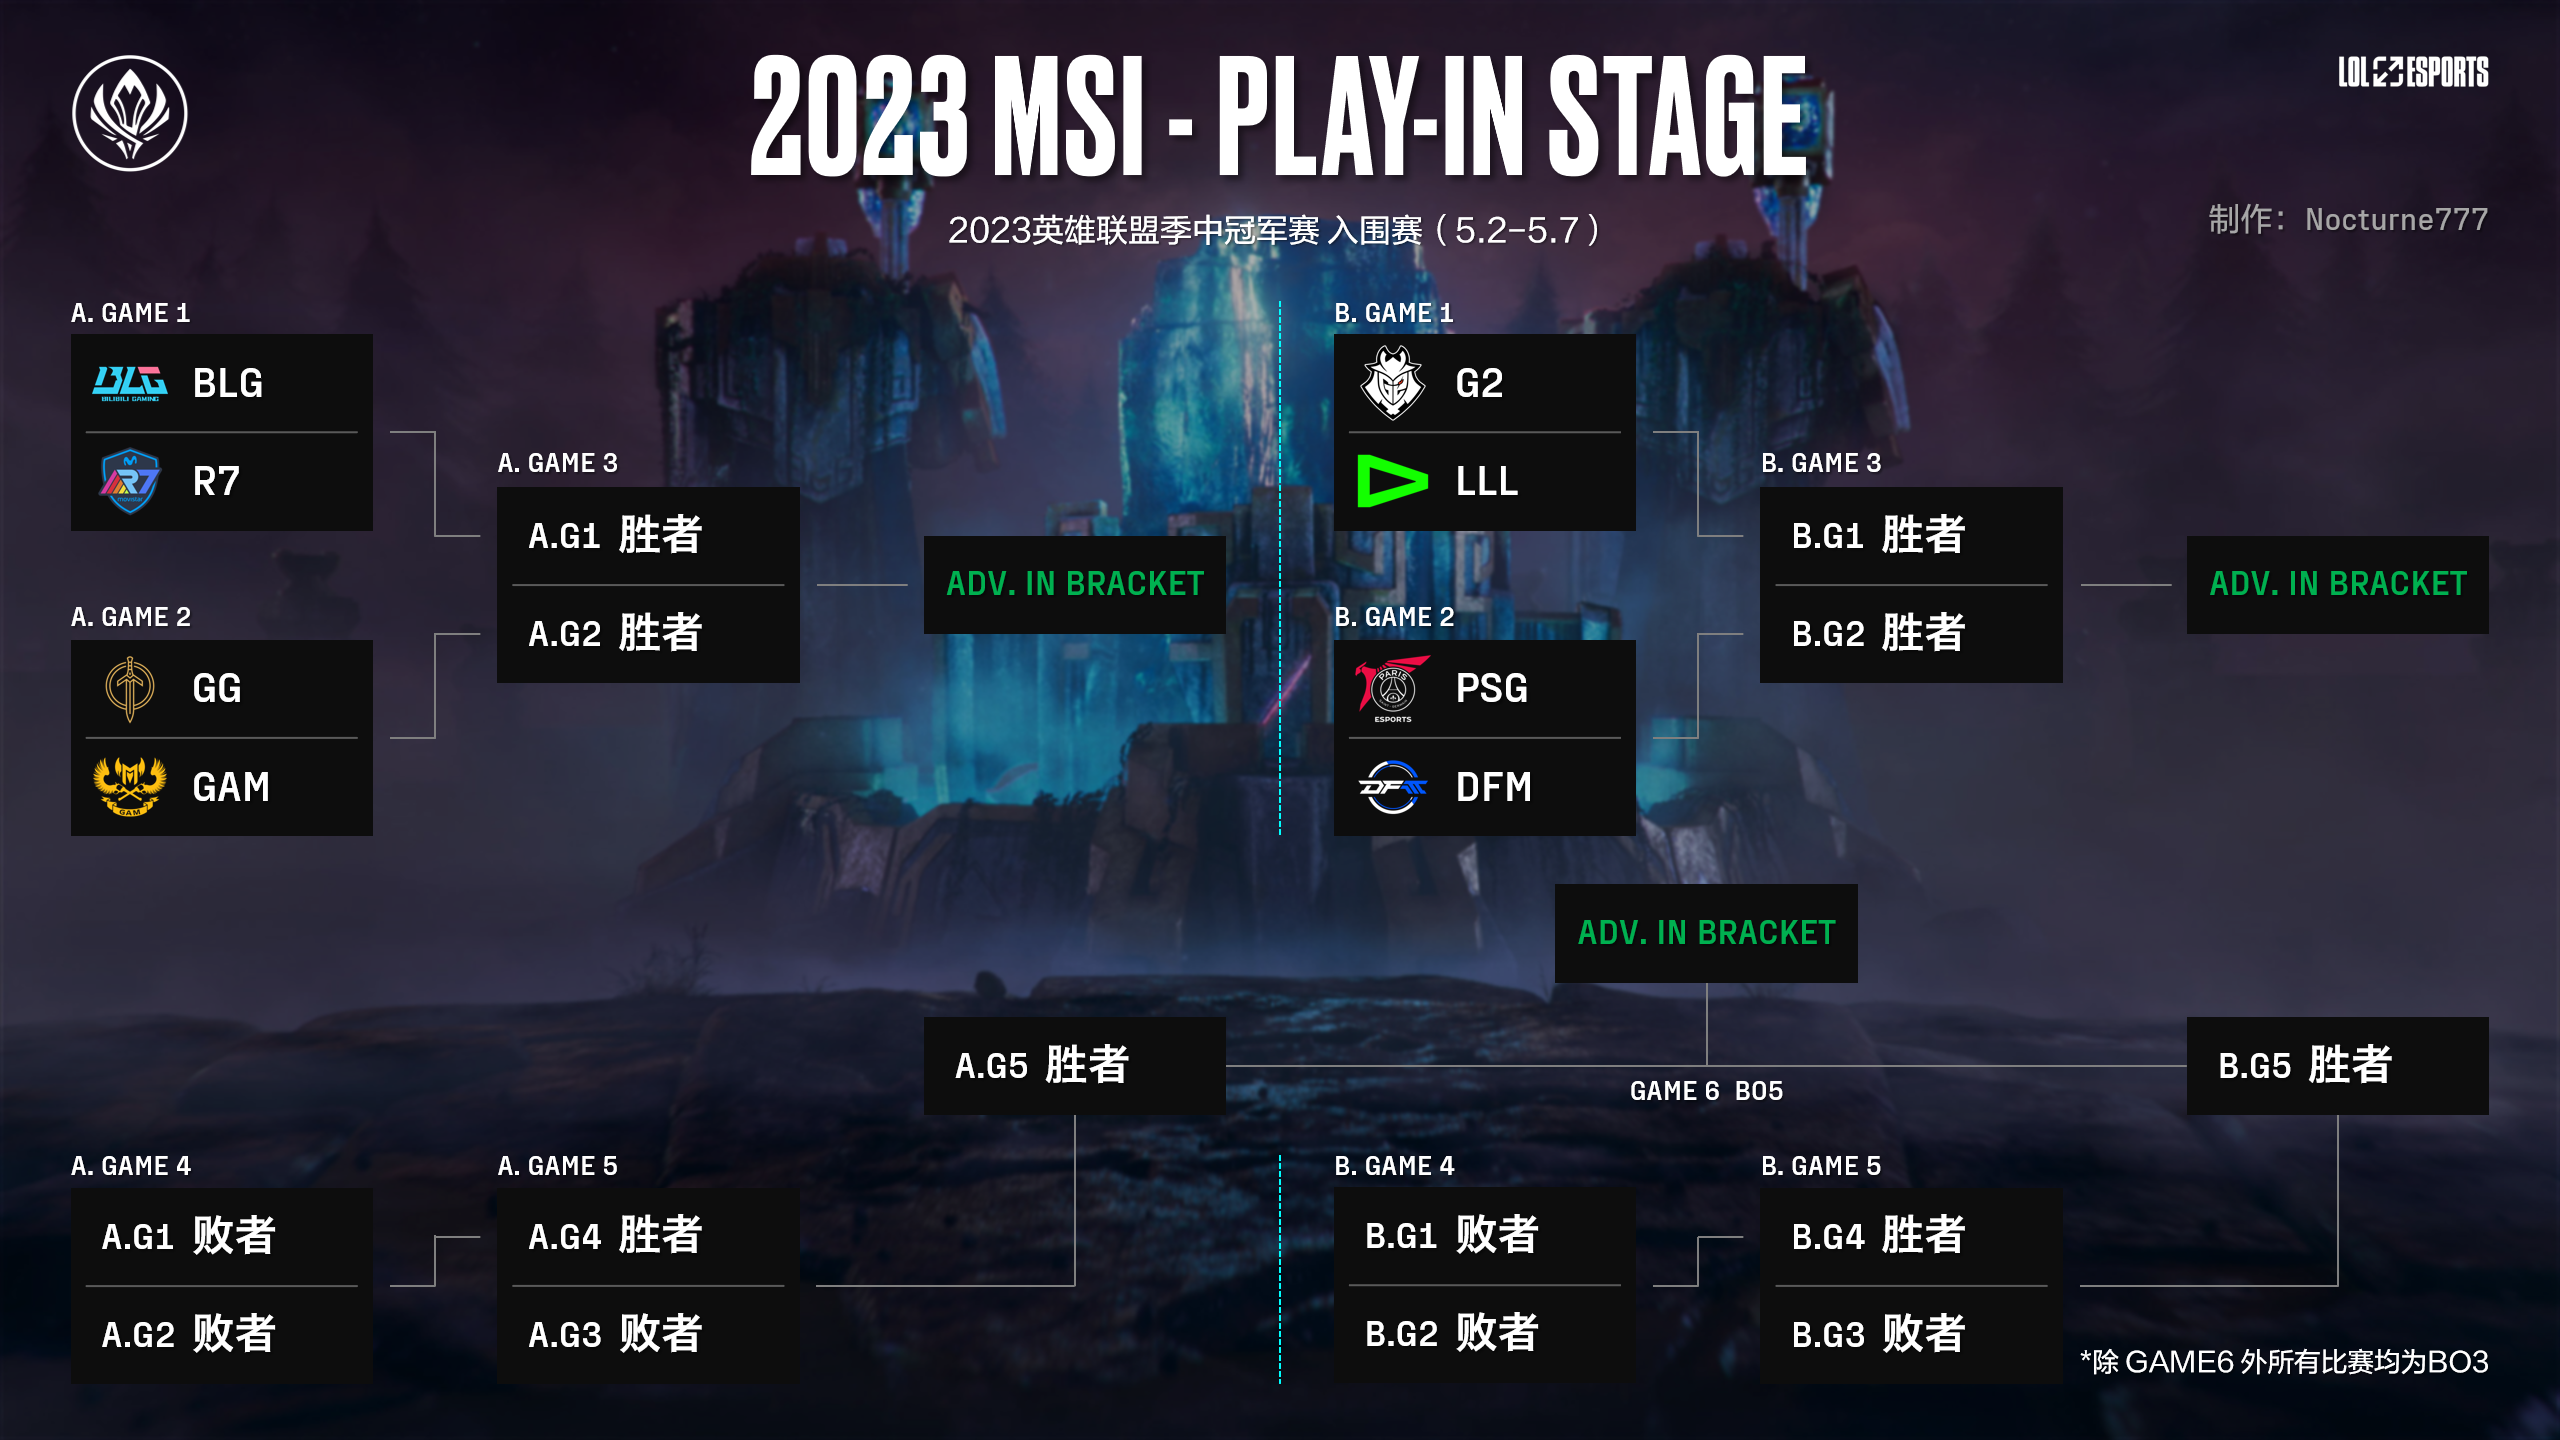 MSI 2023 in London: New format explained | ONE Esports